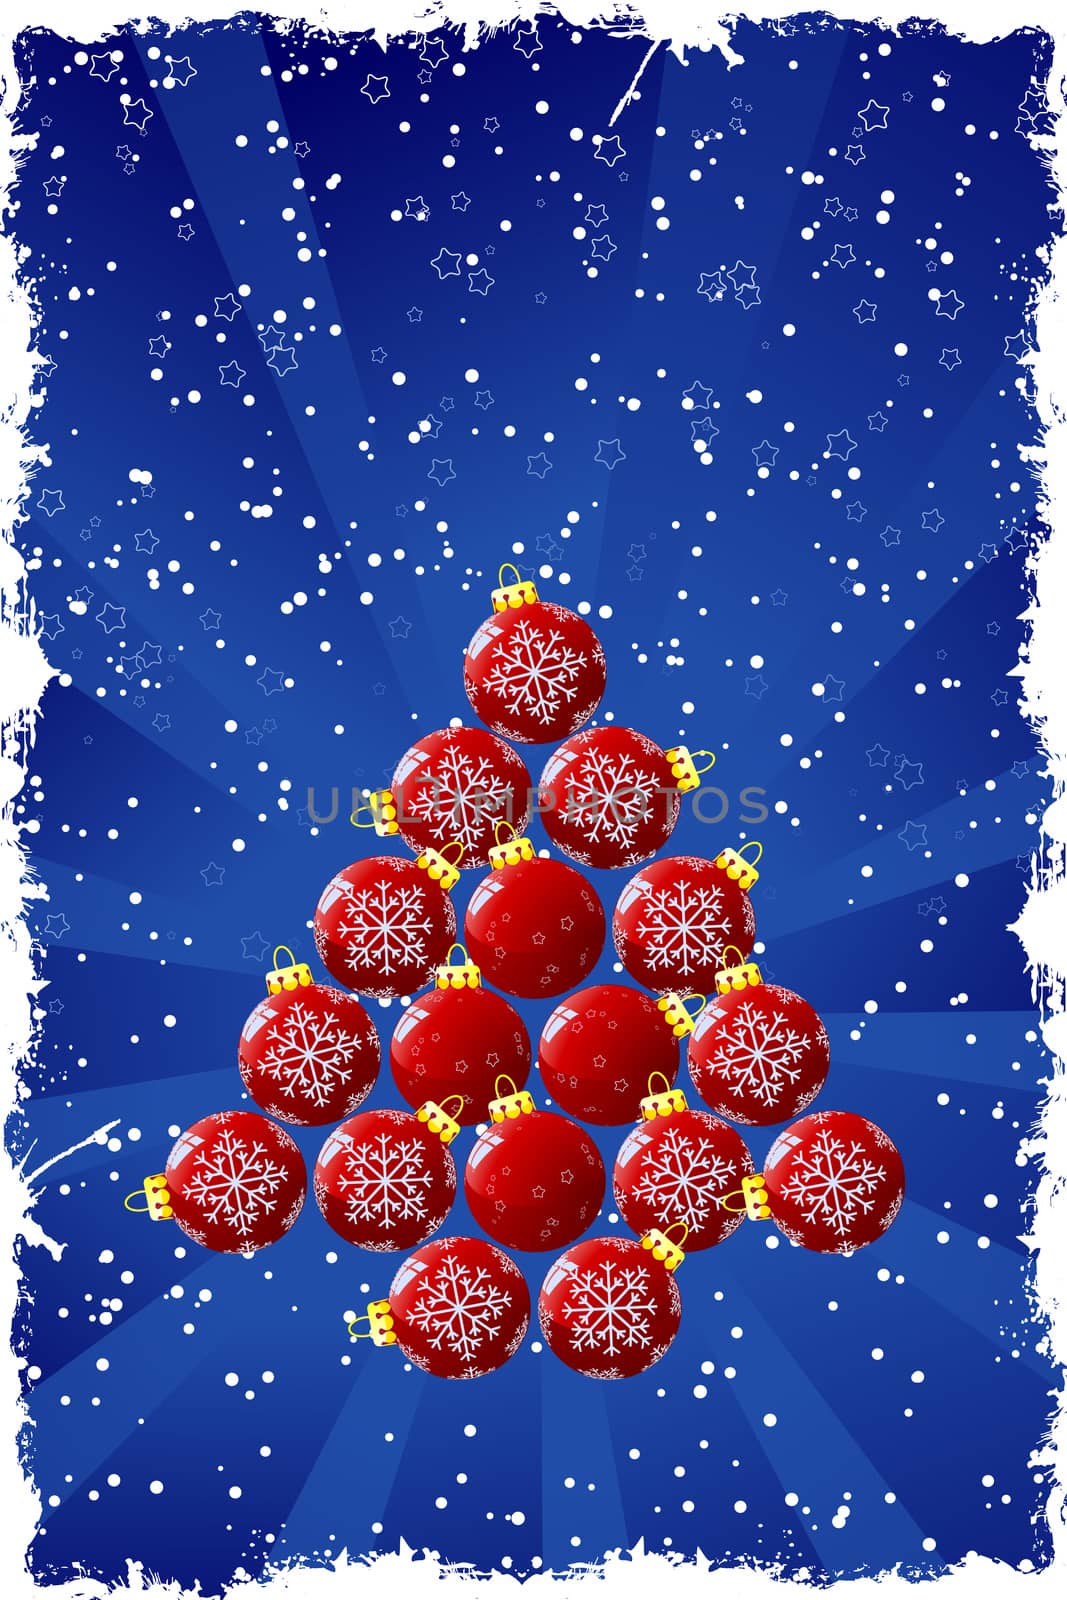 Christmas background with baubles stars and snow